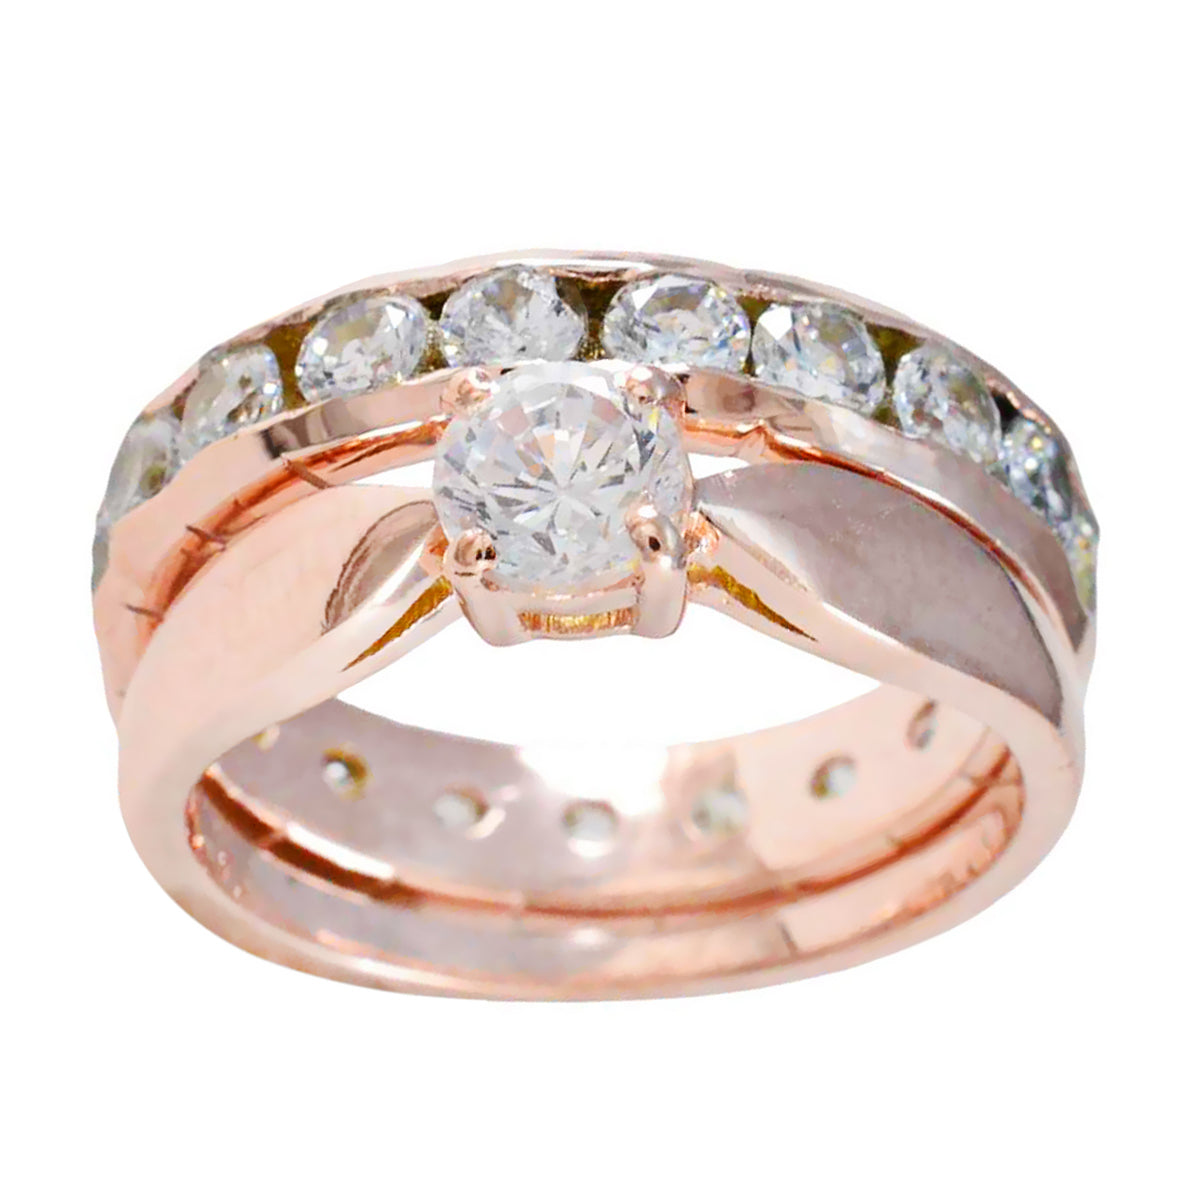 Riyo Overall Silver Ring With Rose Gold Plating White CZ Stone Round Shape Prong Setting Designer Jewelry Wedding Ring